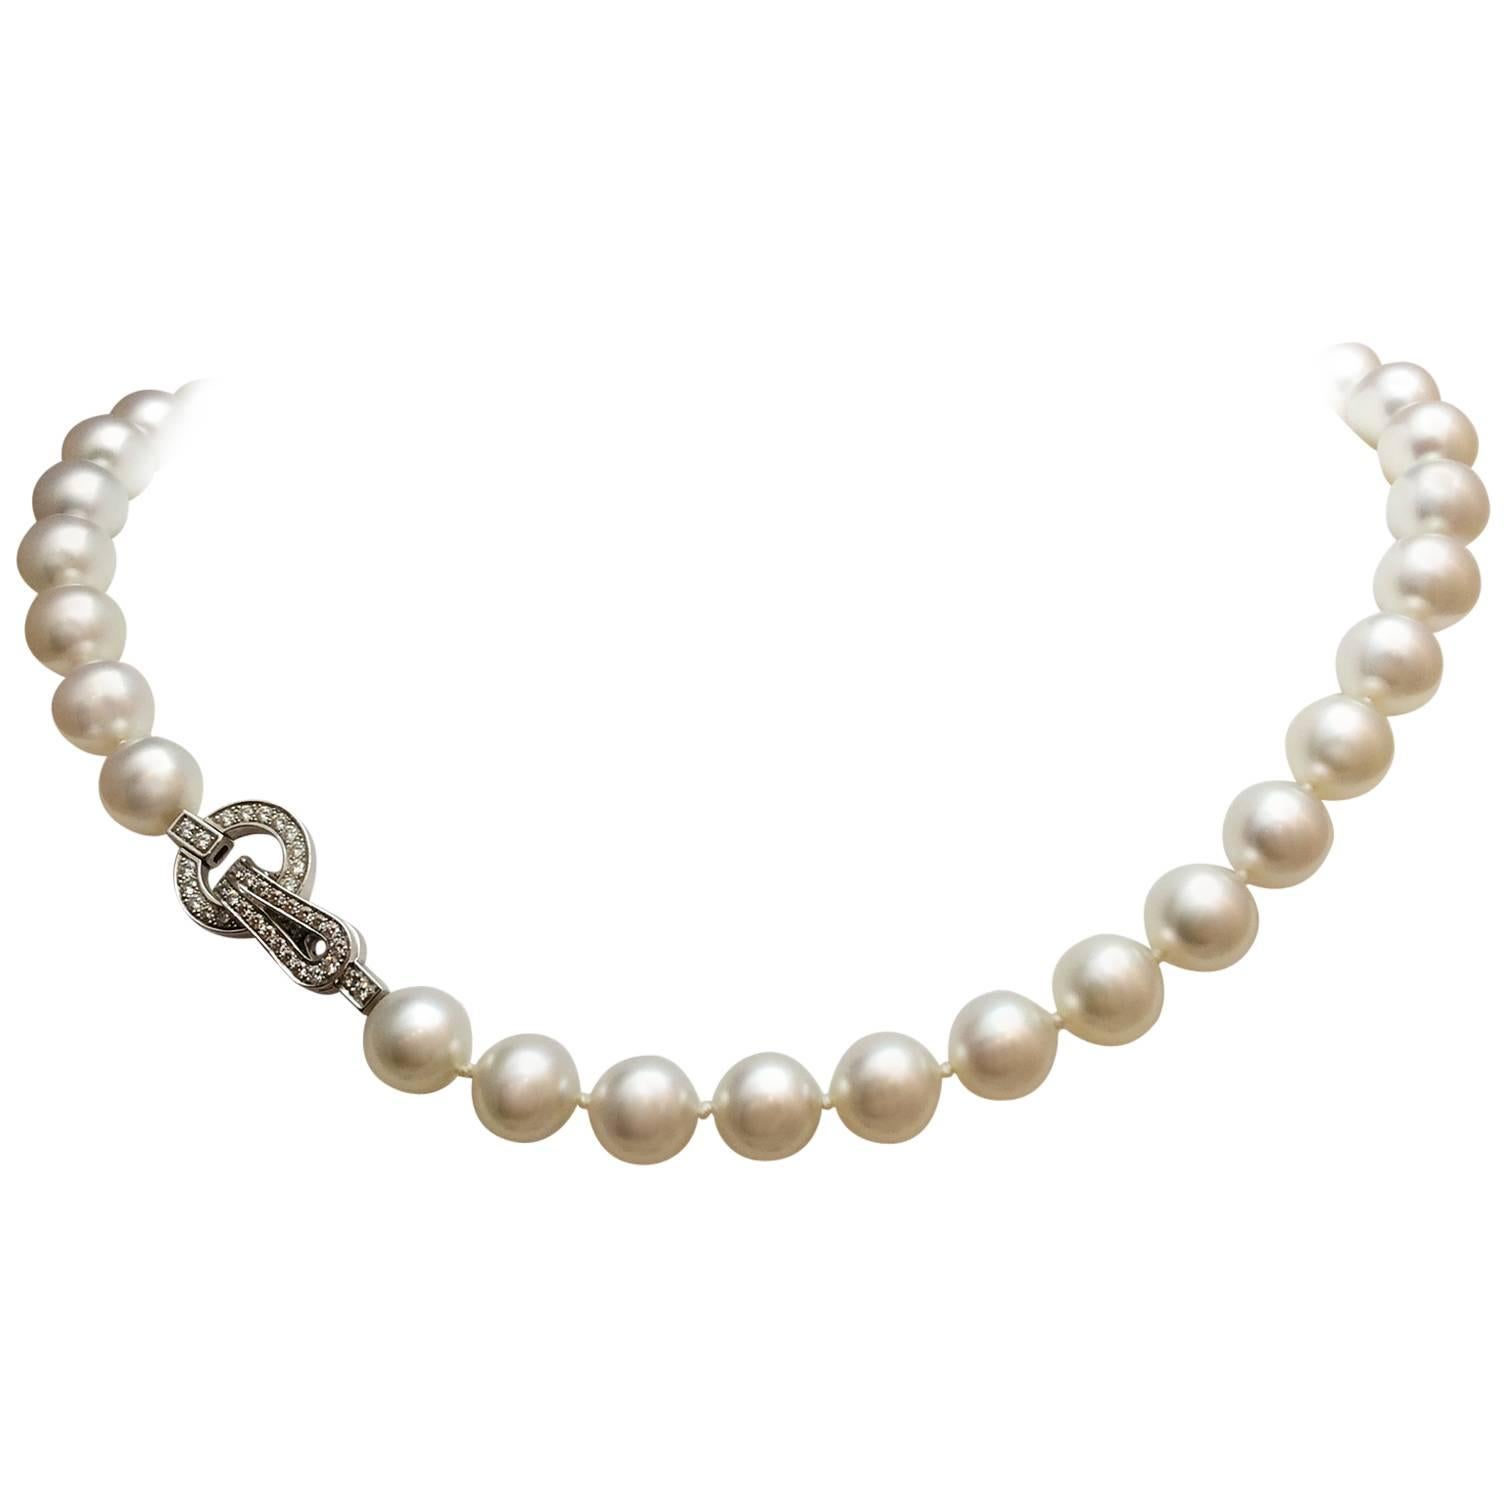 Exceptional Cartier South Sea Pearls Necklace